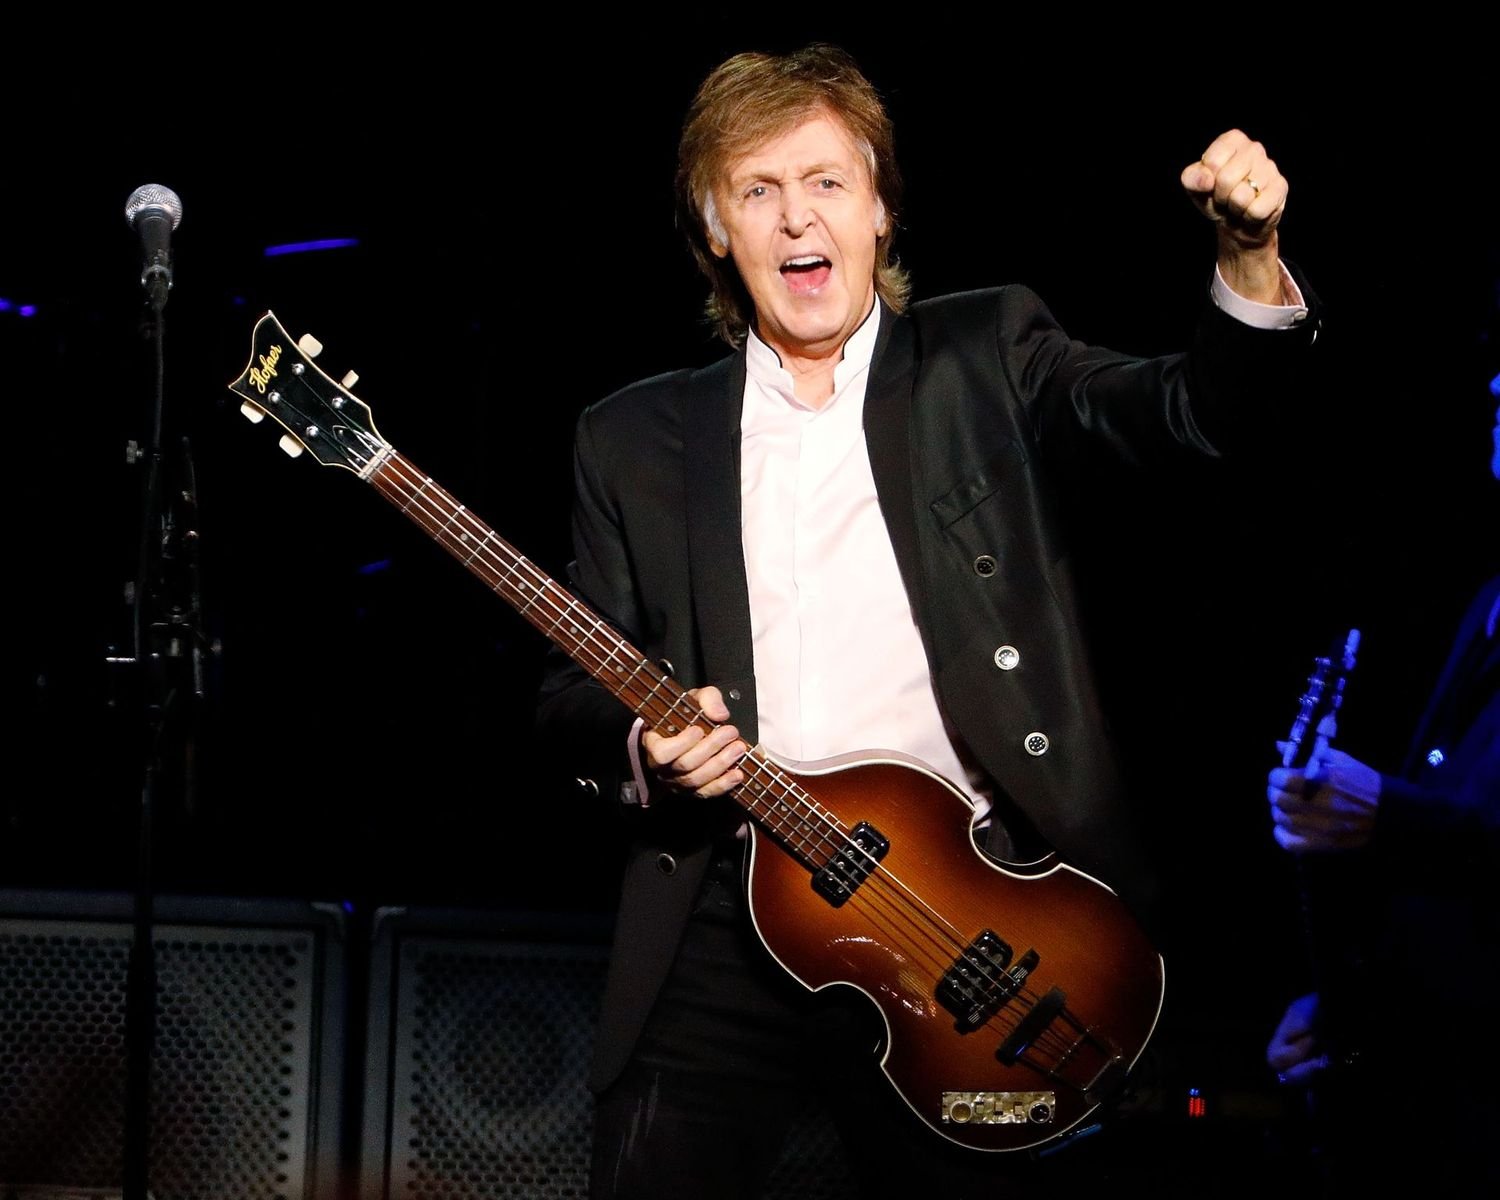 Sir Paul McCartney at Barclays Center on September 21, 2017 | Photo: Getty Images